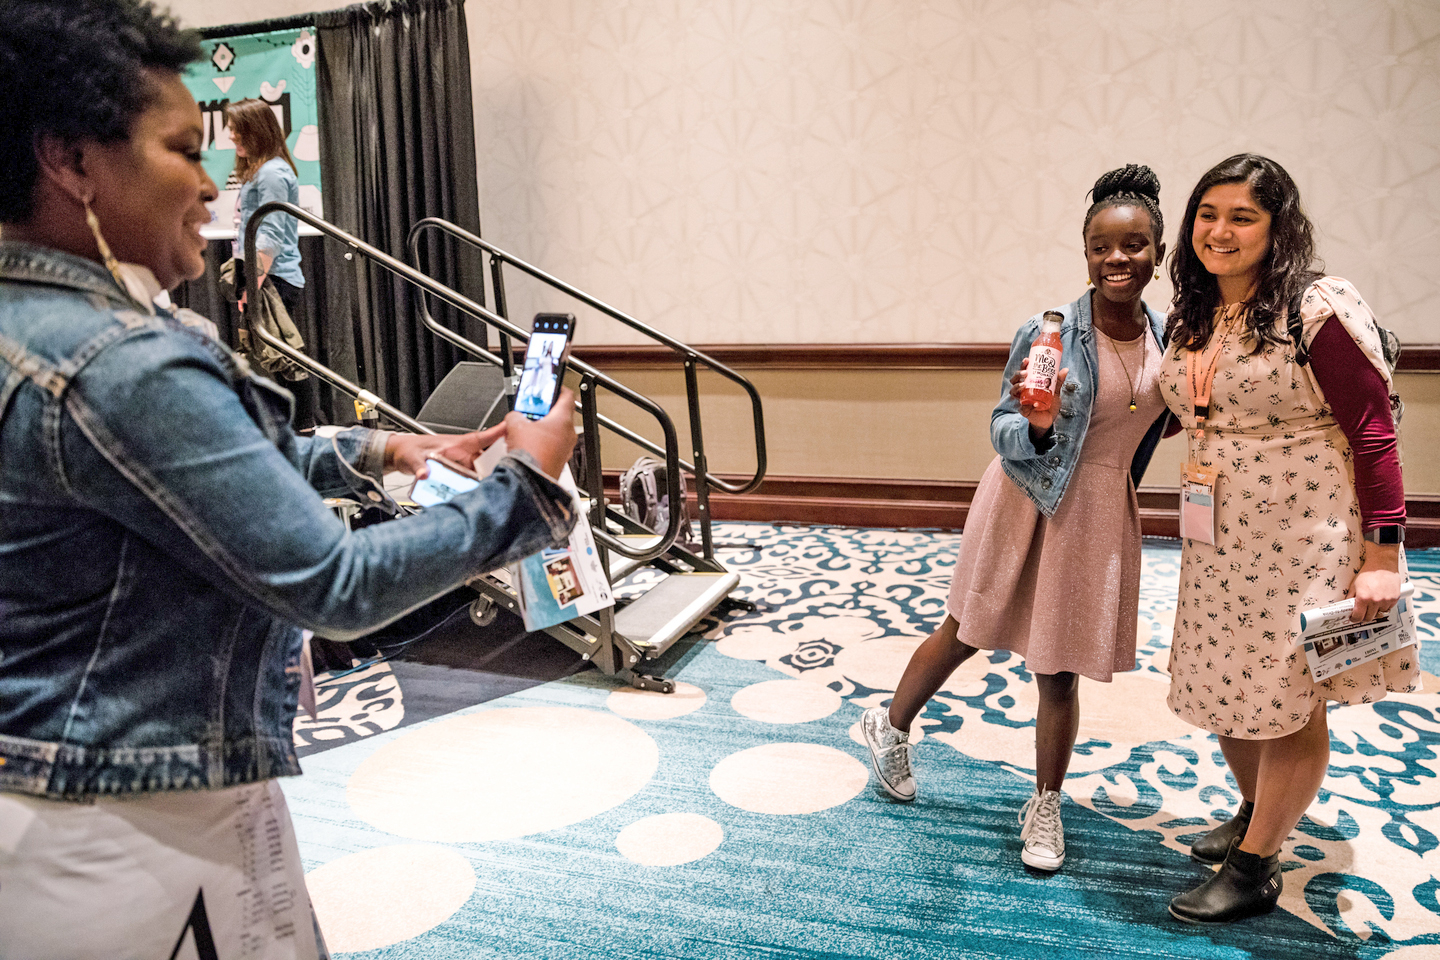 Mikaila Ulmer at the Bee-Suite to C-Suite: The Making of Me and the Bees session – Photo by Bianca Hooks